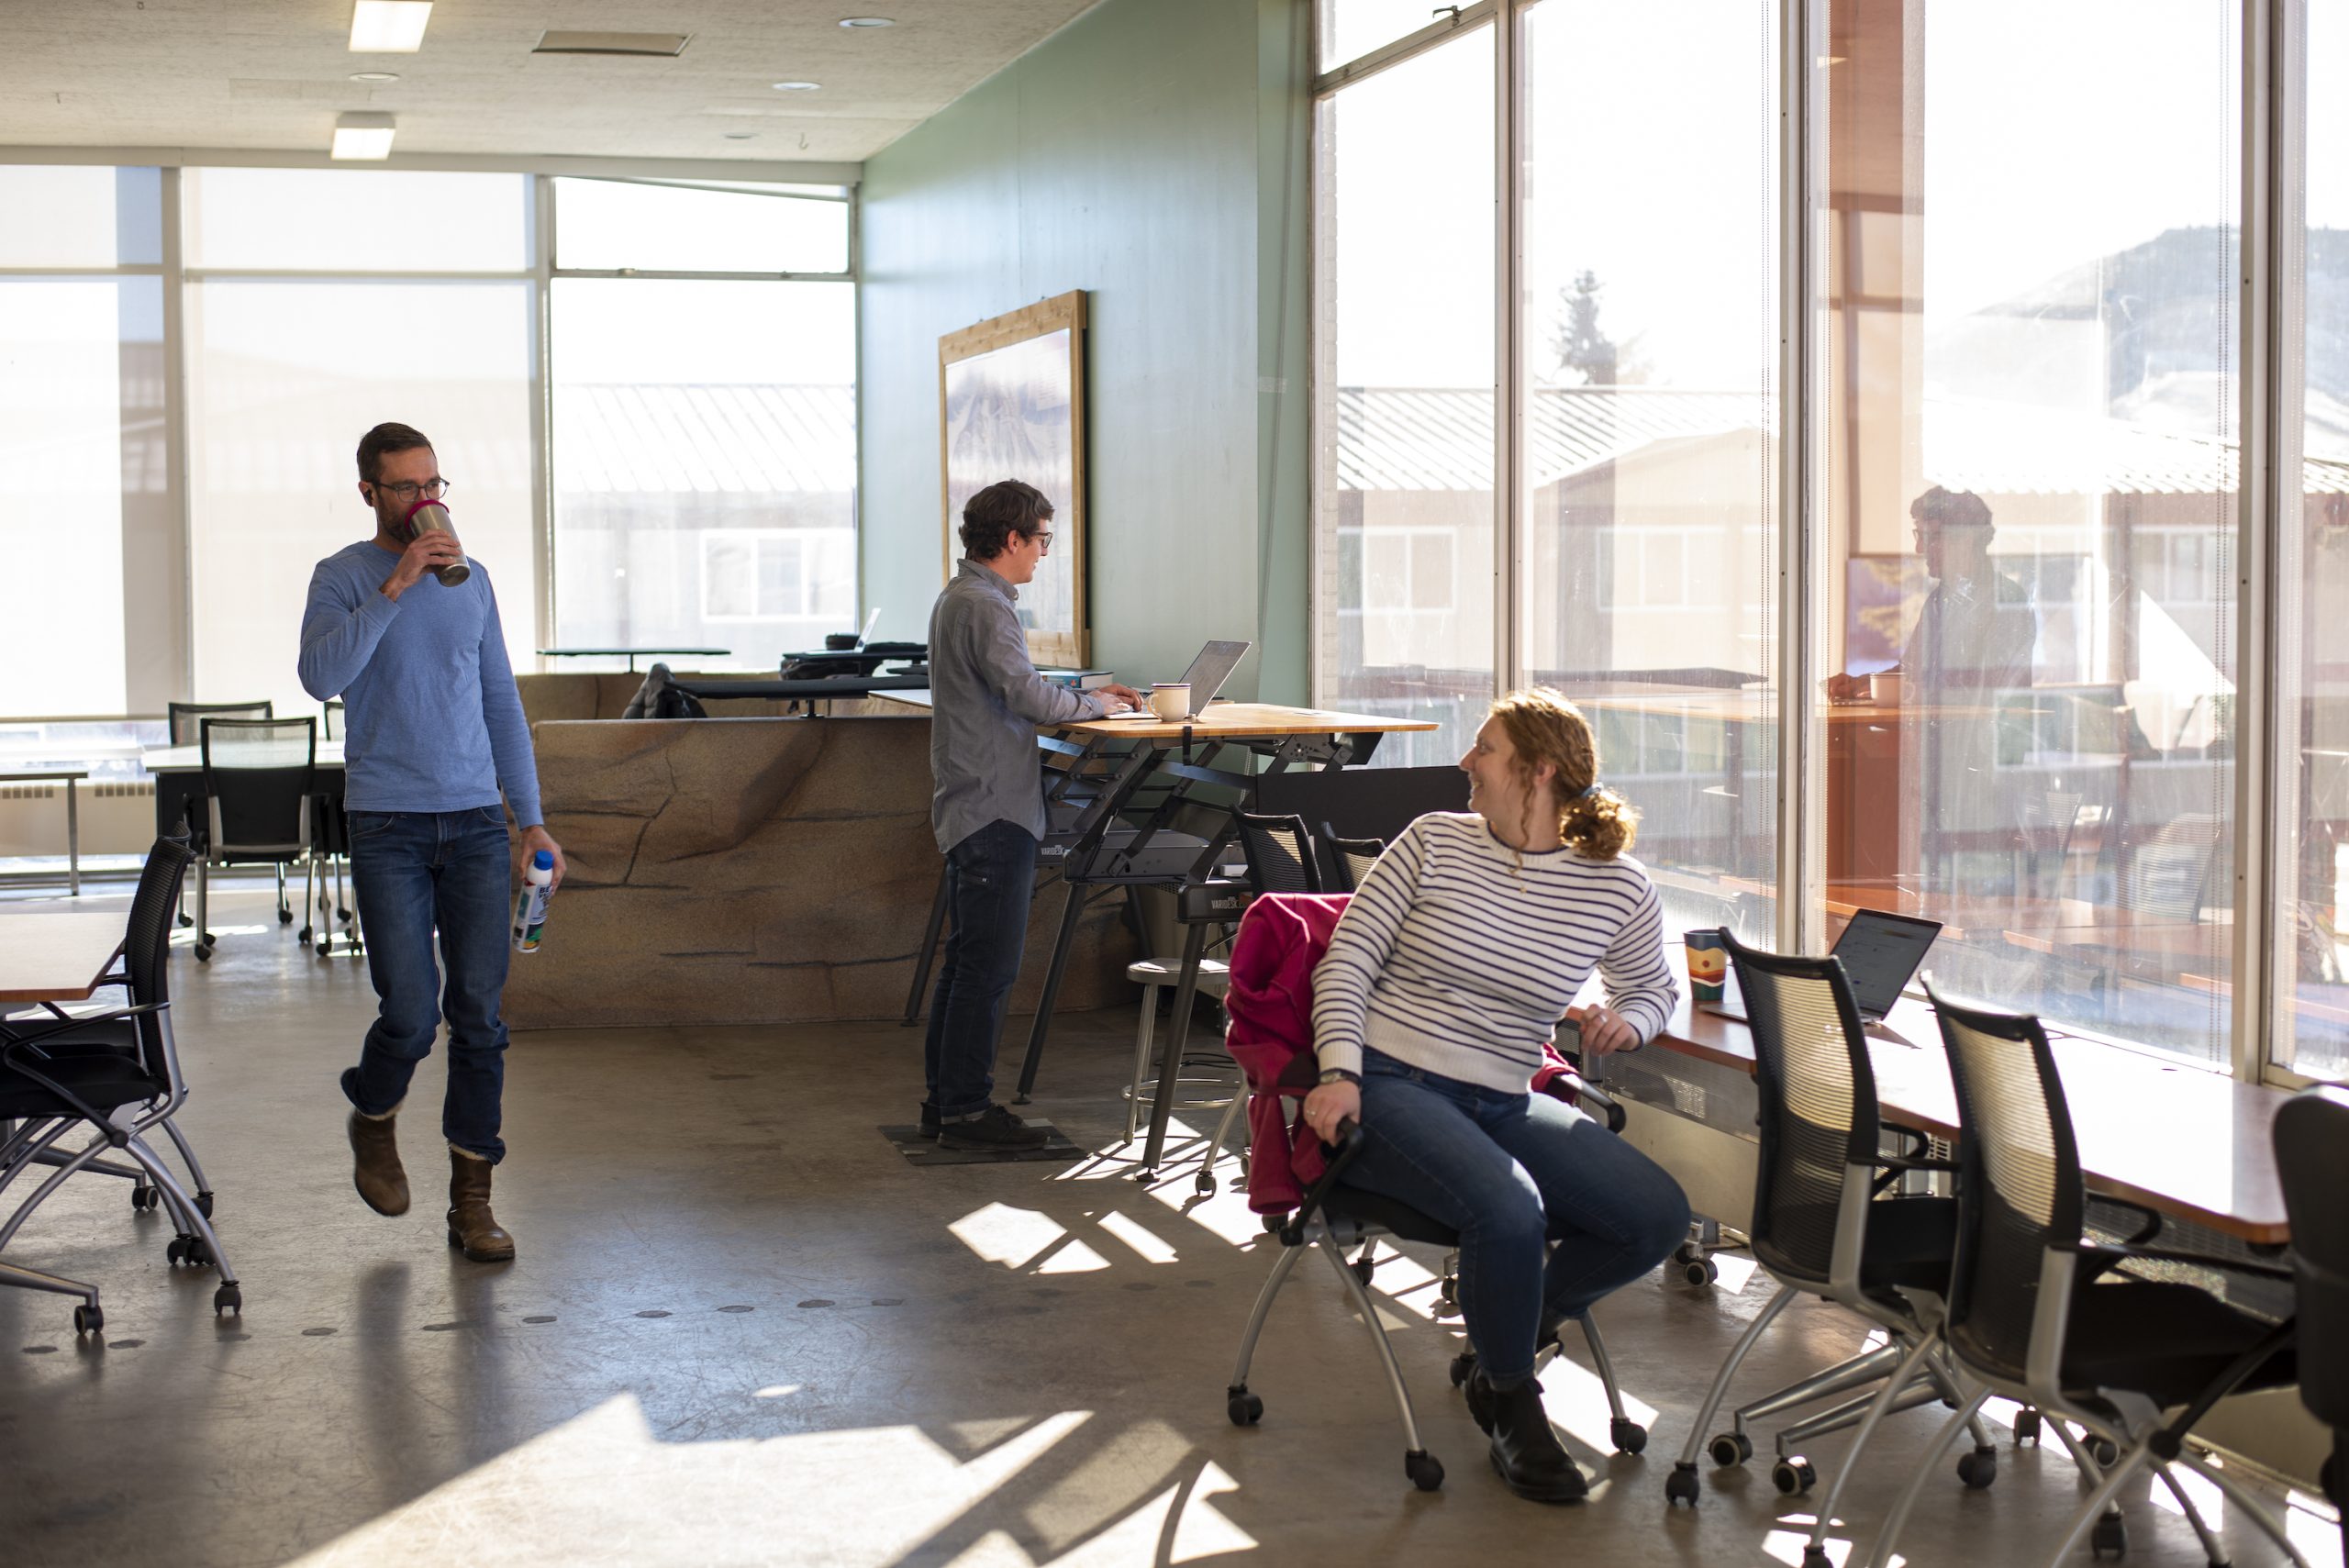 One person walks, one person stands at a desk, and one person sits at a desk in a workspace 